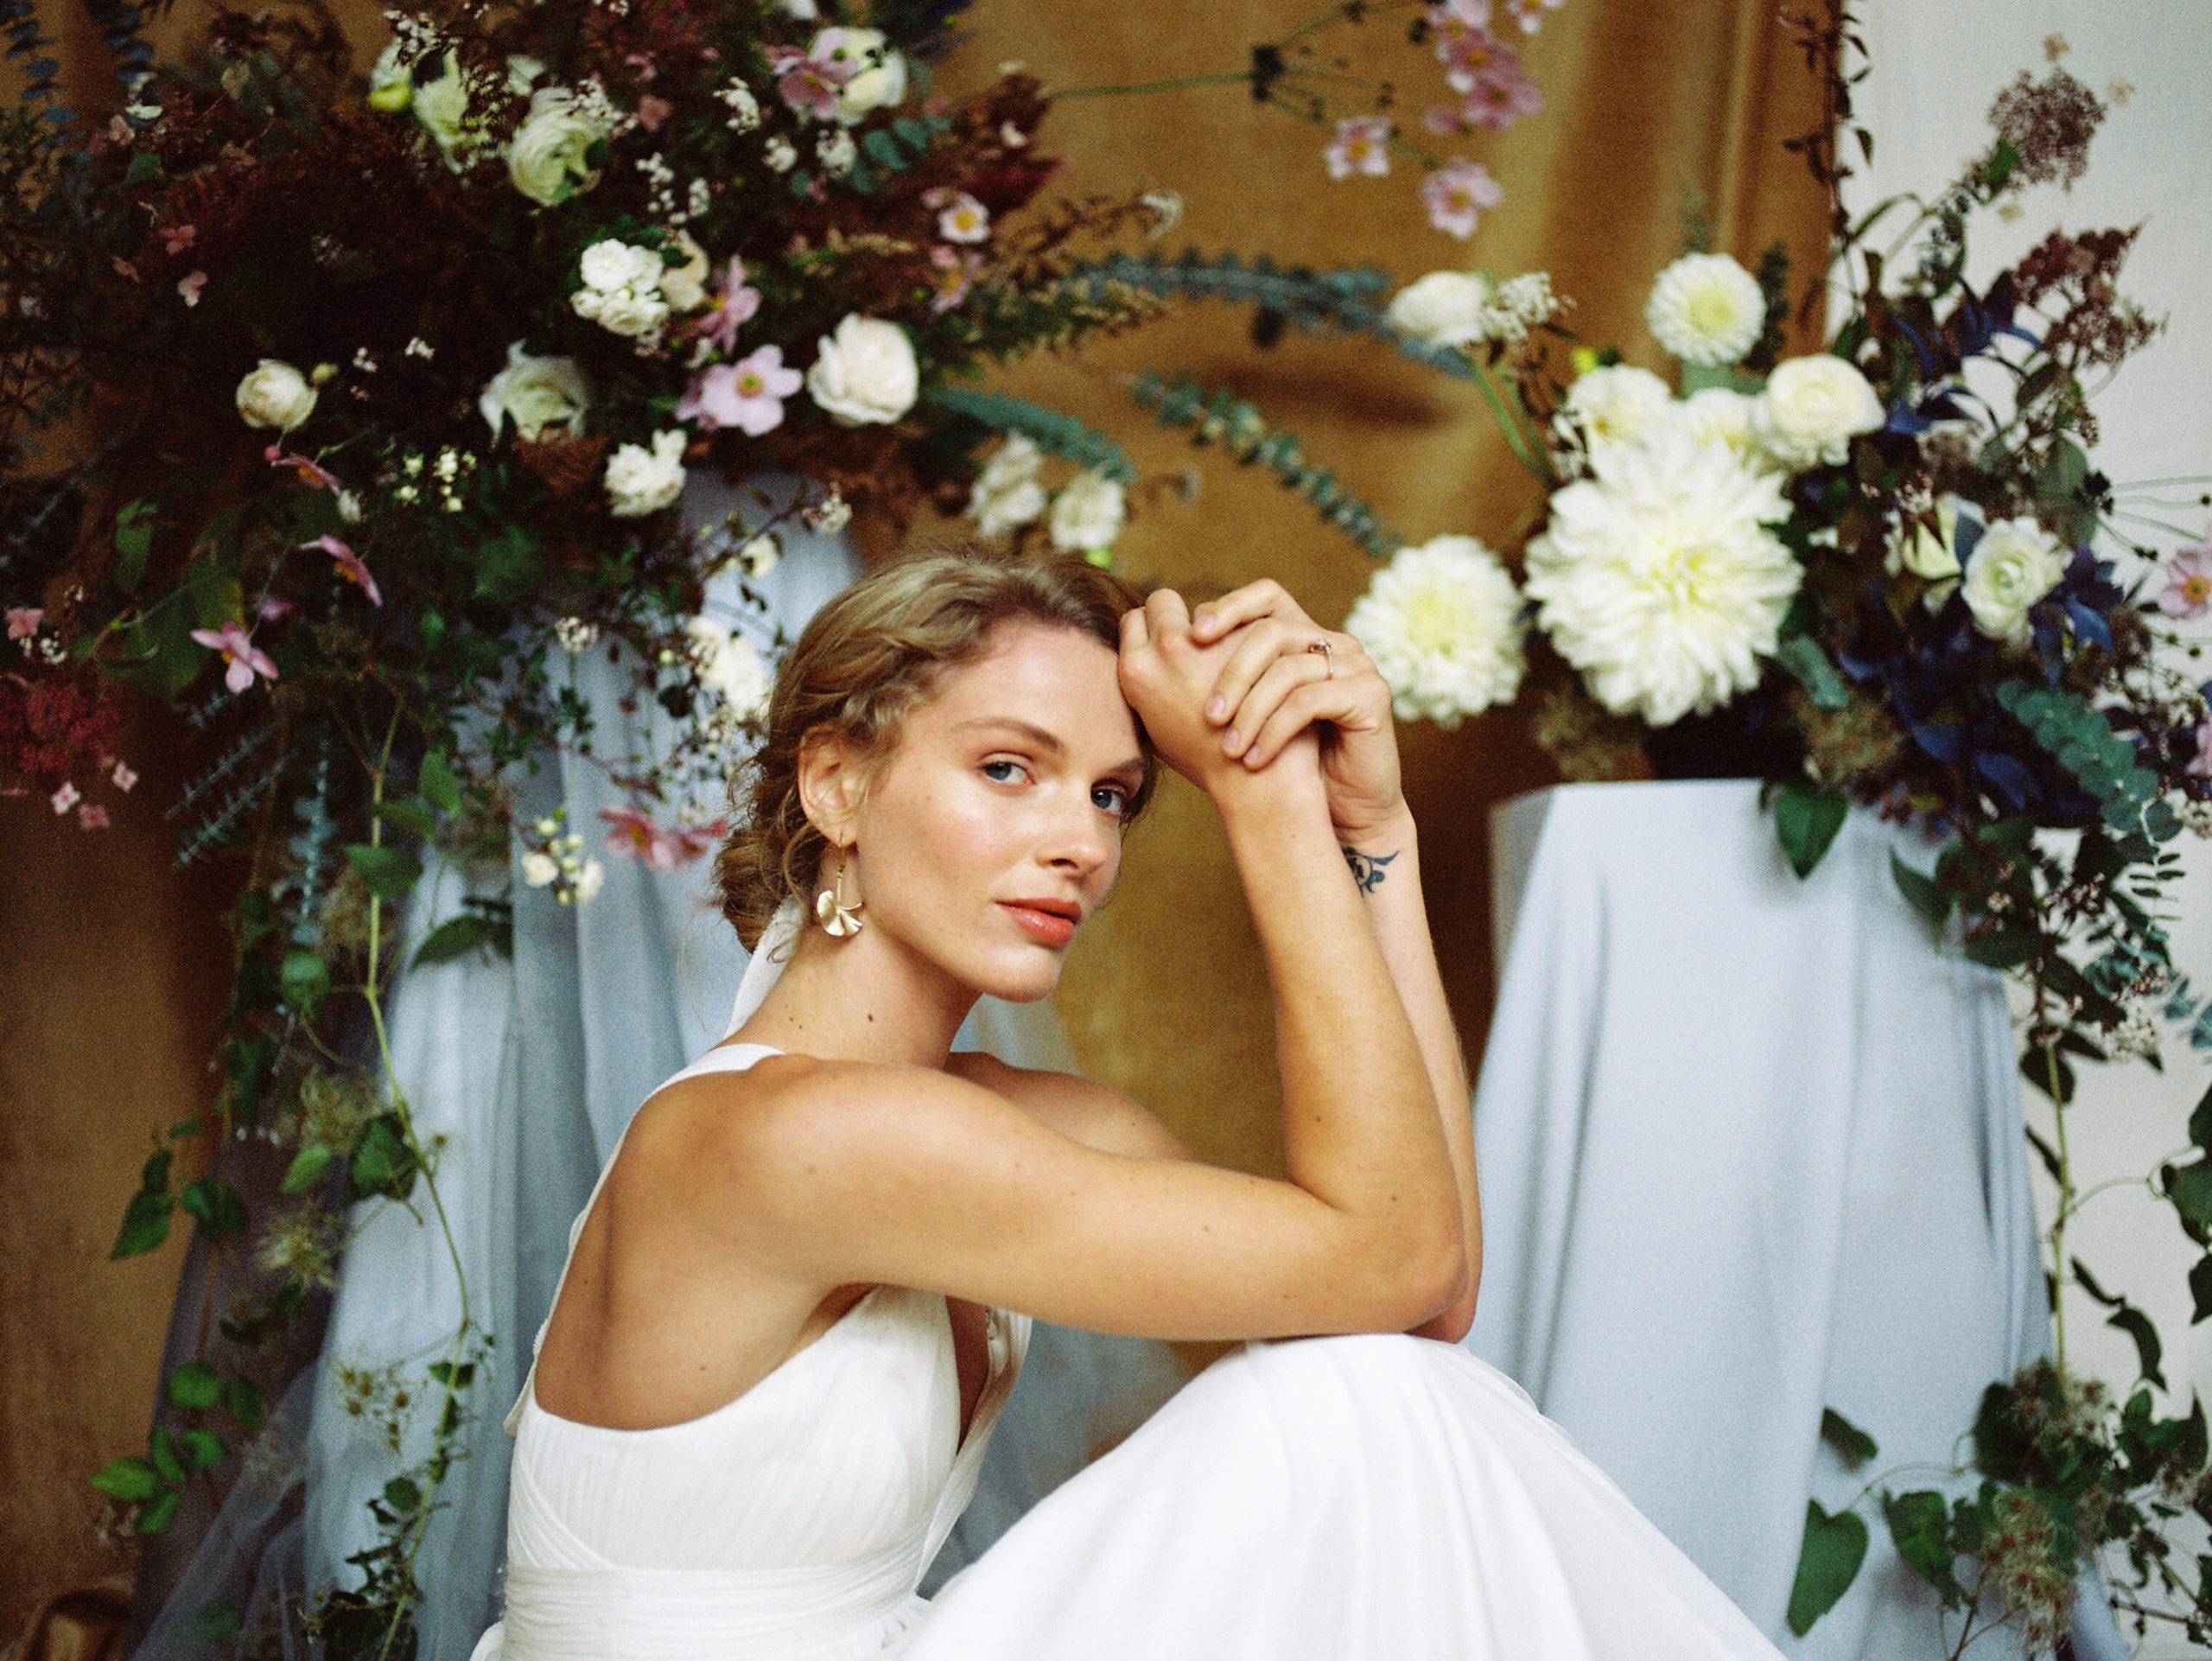 A serene bride lounging among a living floral installation by Selva Floral Design, with Makeup by Karen Cordell Artistry, wearing BHLDN from Brides with a Cause Portland